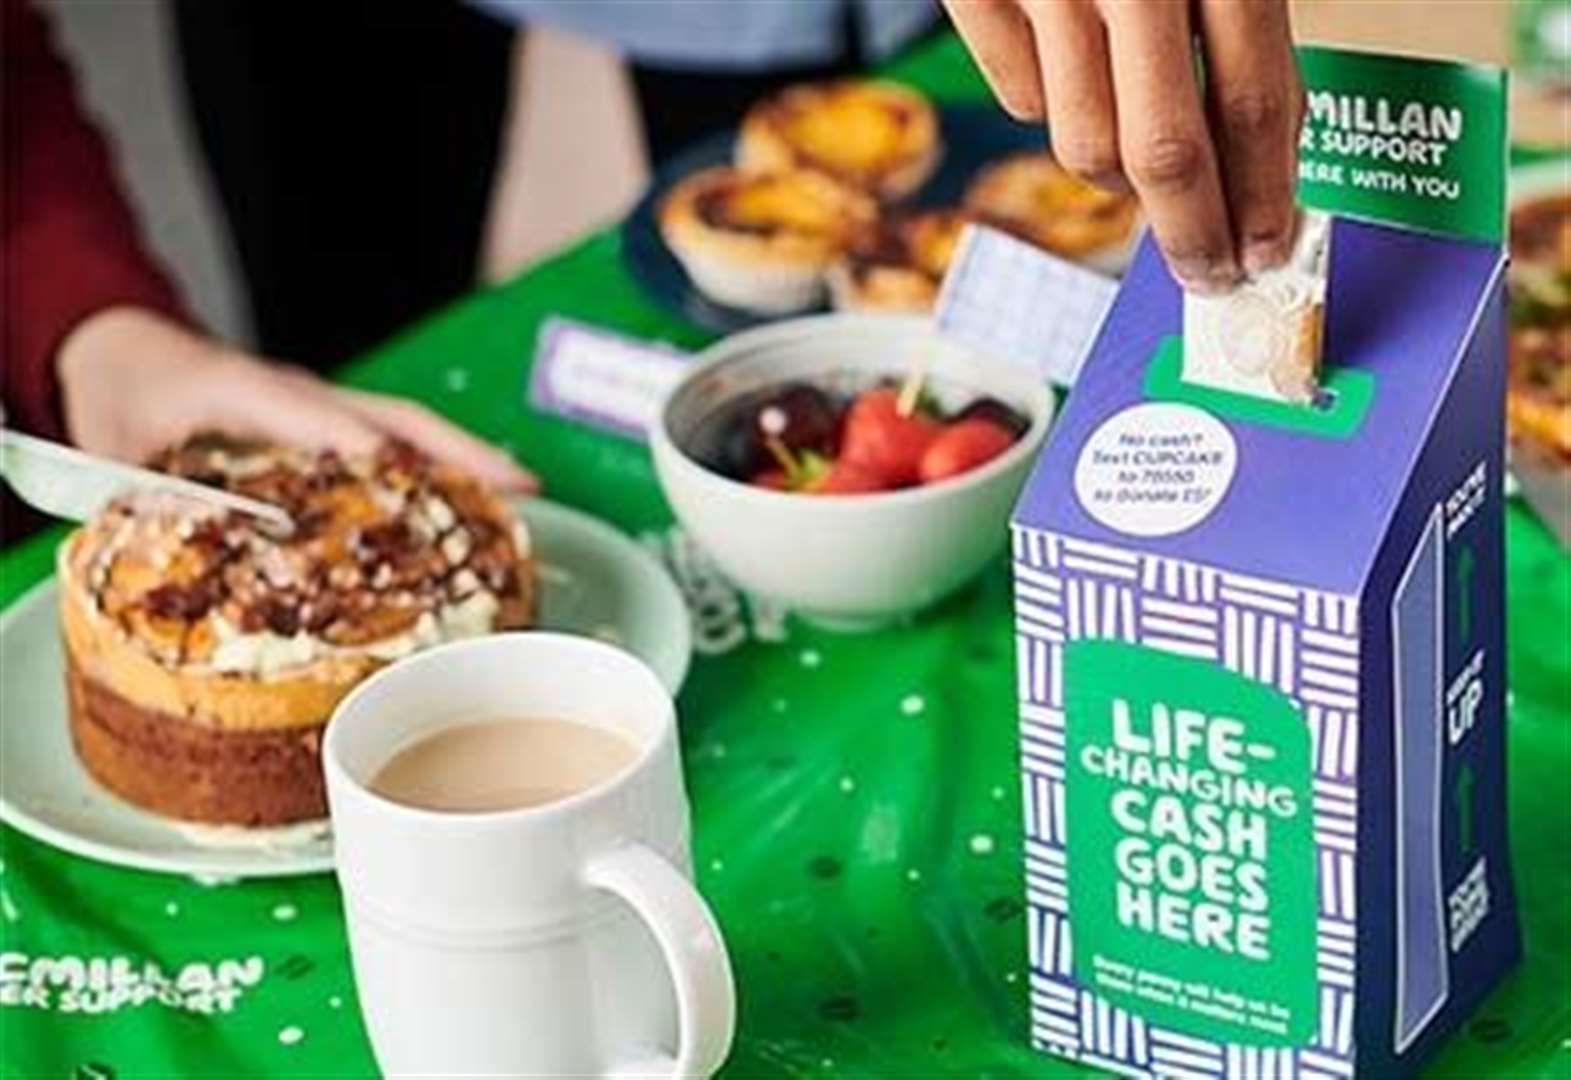 Make a morning of it for Macmillan